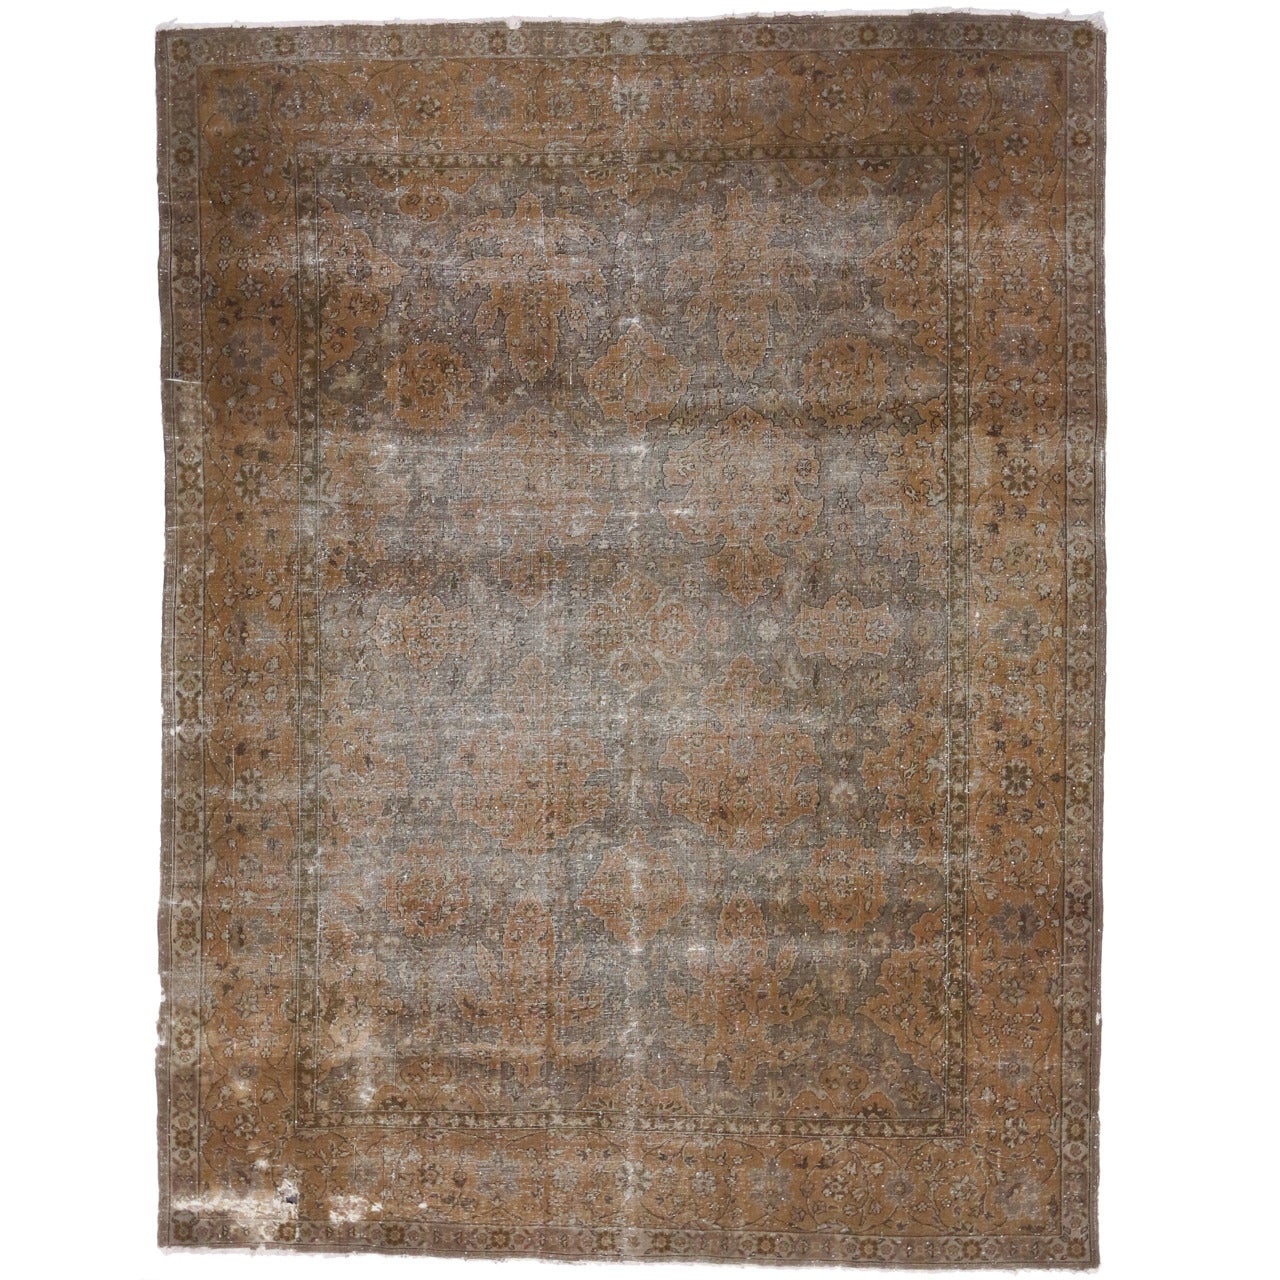 Distressed Antique Turkish Sparta Area Rug with Industrial Machine Age Style